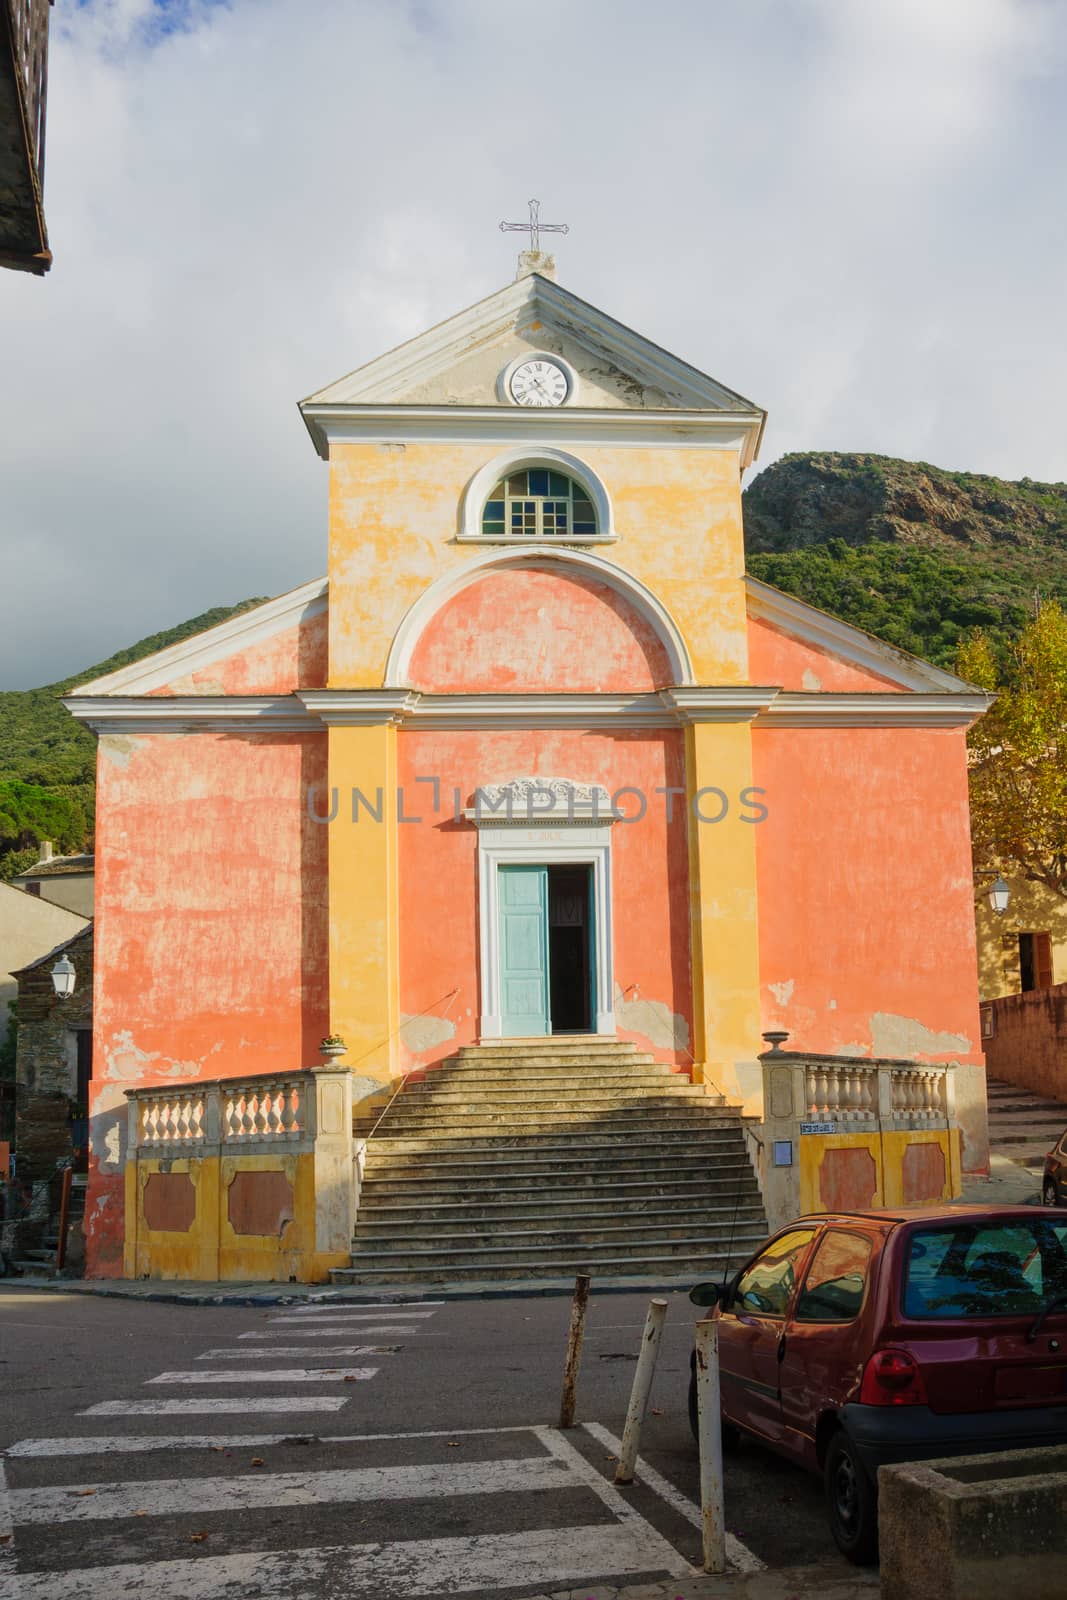 The church of the village of Nonza, in Cap Corse, Corsica, France